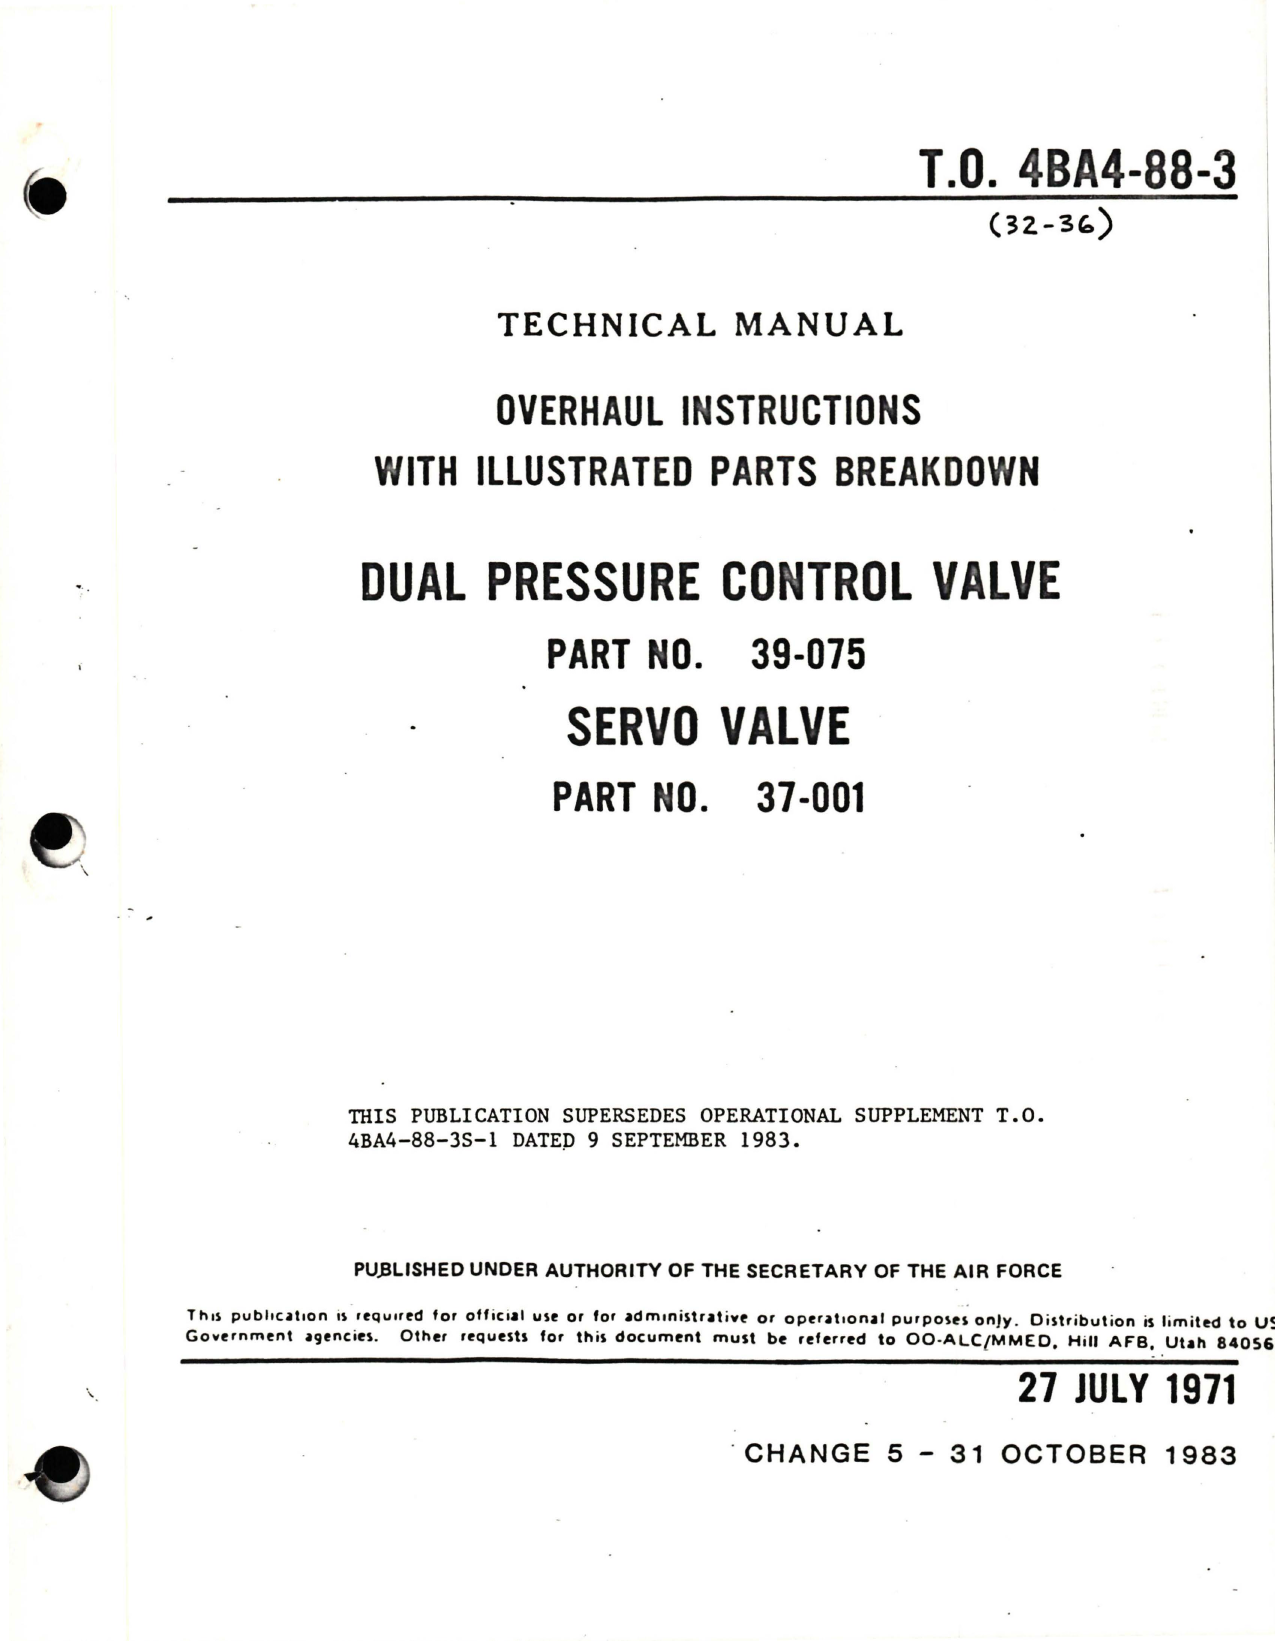 Sample page 1 from AirCorps Library document: Overhaul Instructions with Illustrated Parts Breakdown for Dual Pressure Control and Servo Valve - Parts 39-075, 37-001